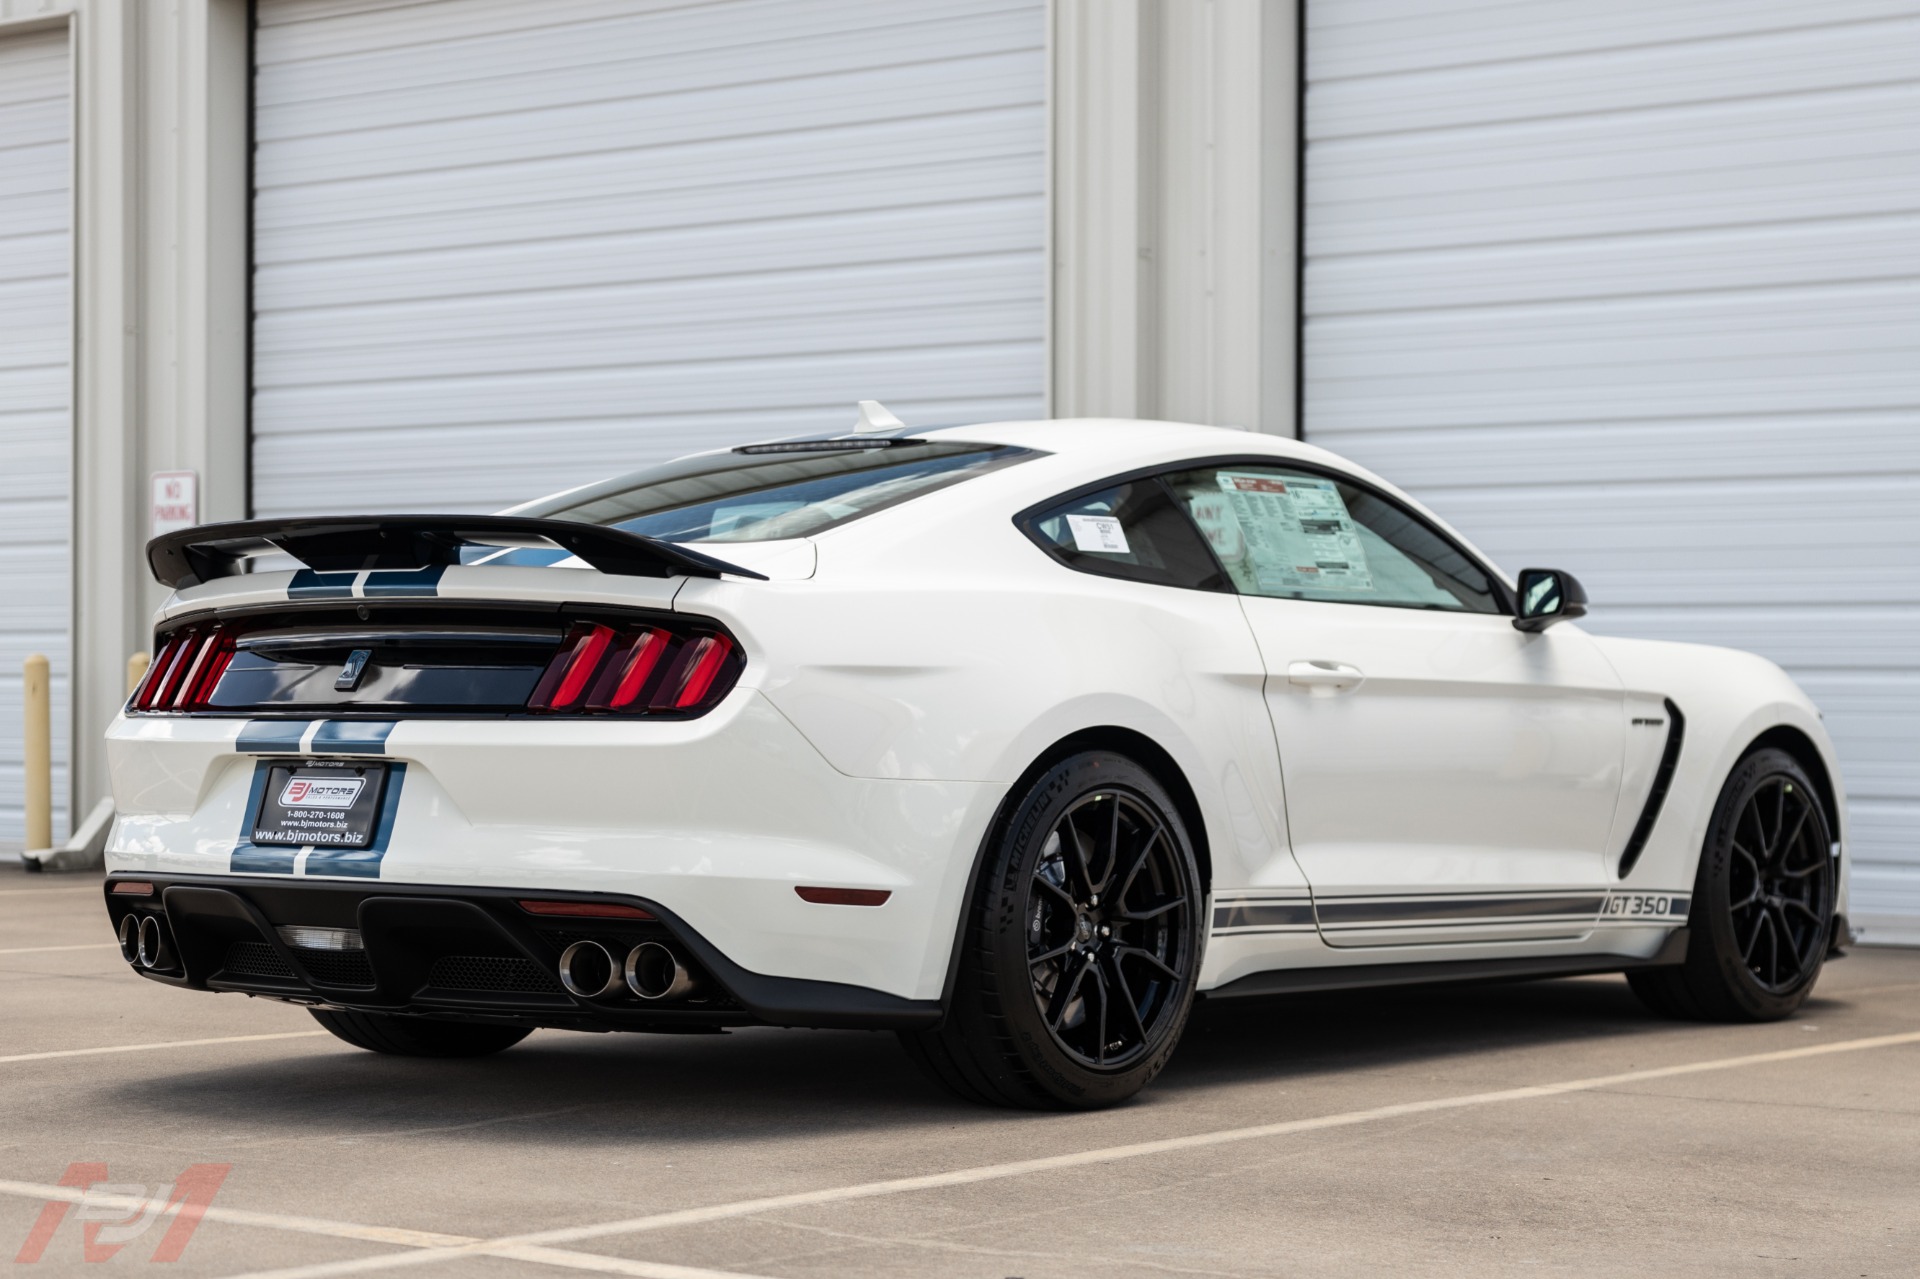 Used 2020 Ford Mustang Shelby GT350 Heritage Edition For Sale (Special ...